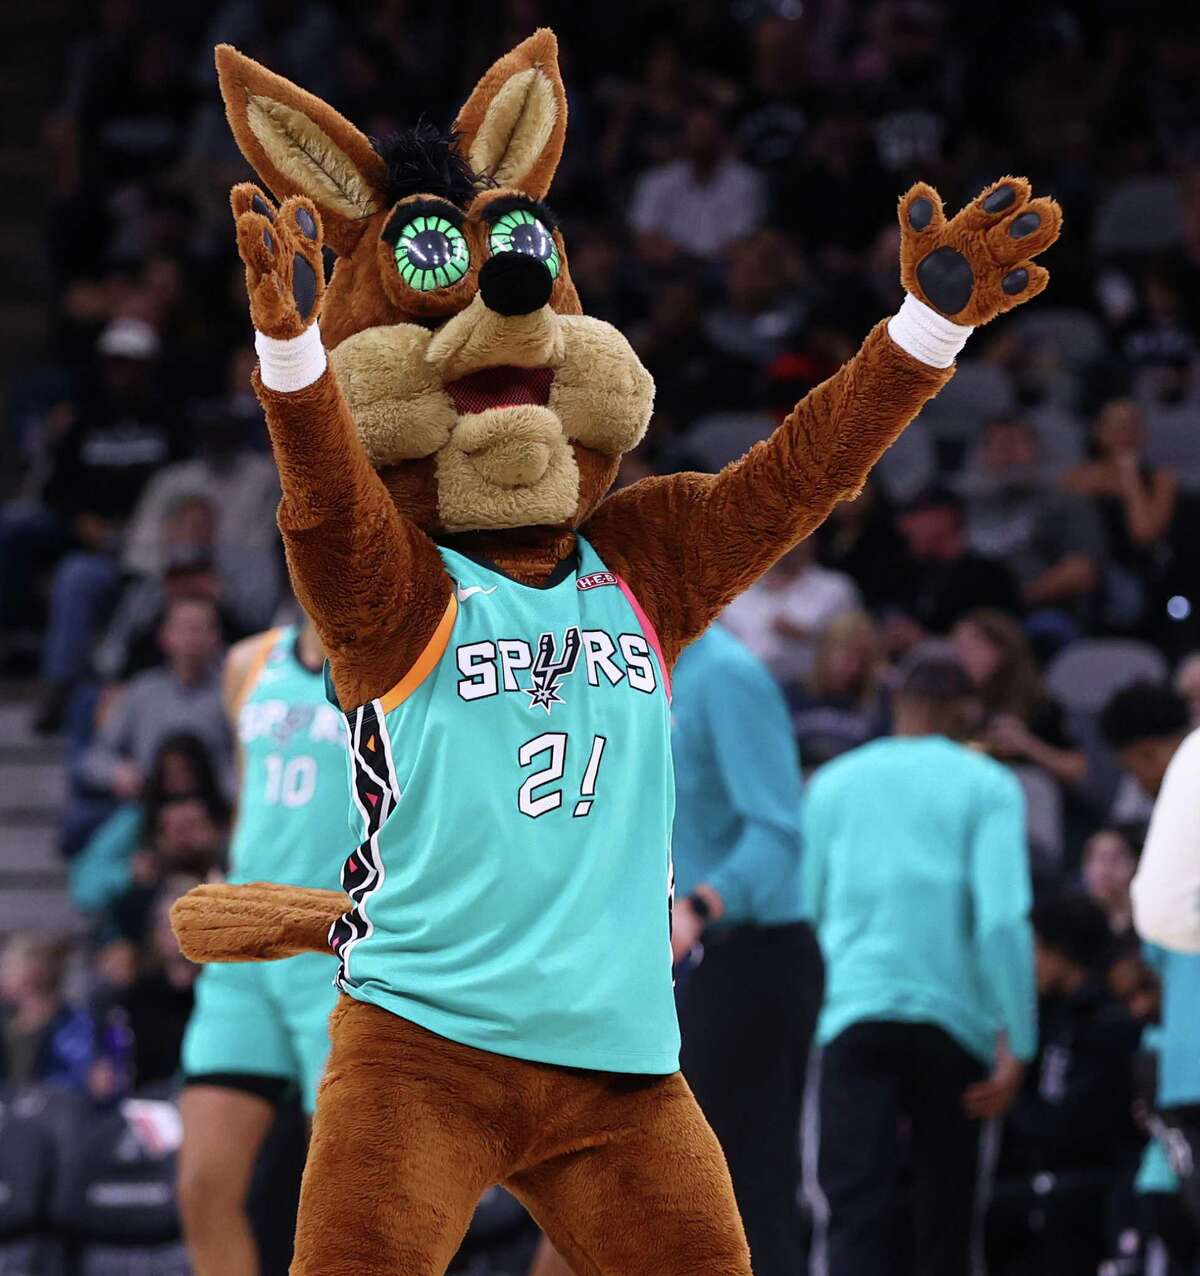 The Spurs Coyote energizes the crowd in the game against the Detroit Pistons at the AT&T Center on Friday, Jan. 6, 2023.